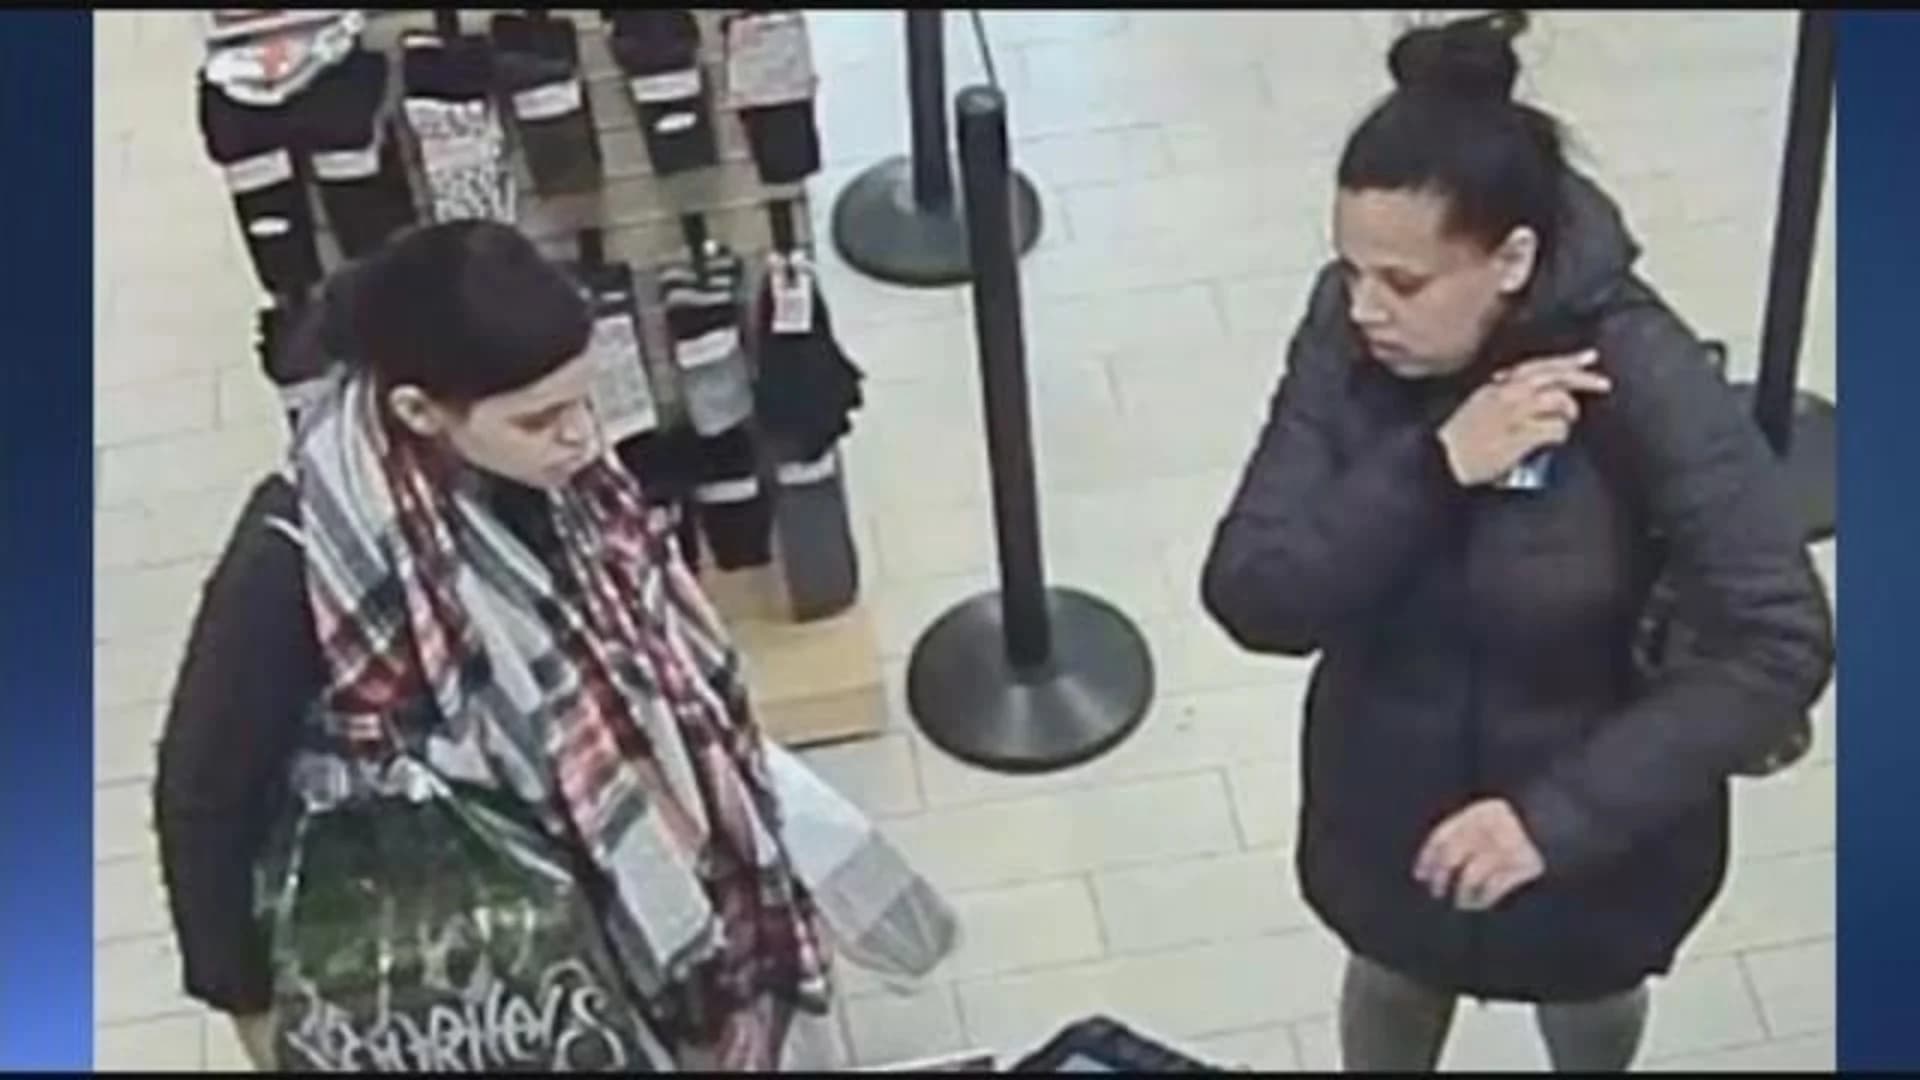 Police seek 2 who racked up unauthorized charges on credit cards